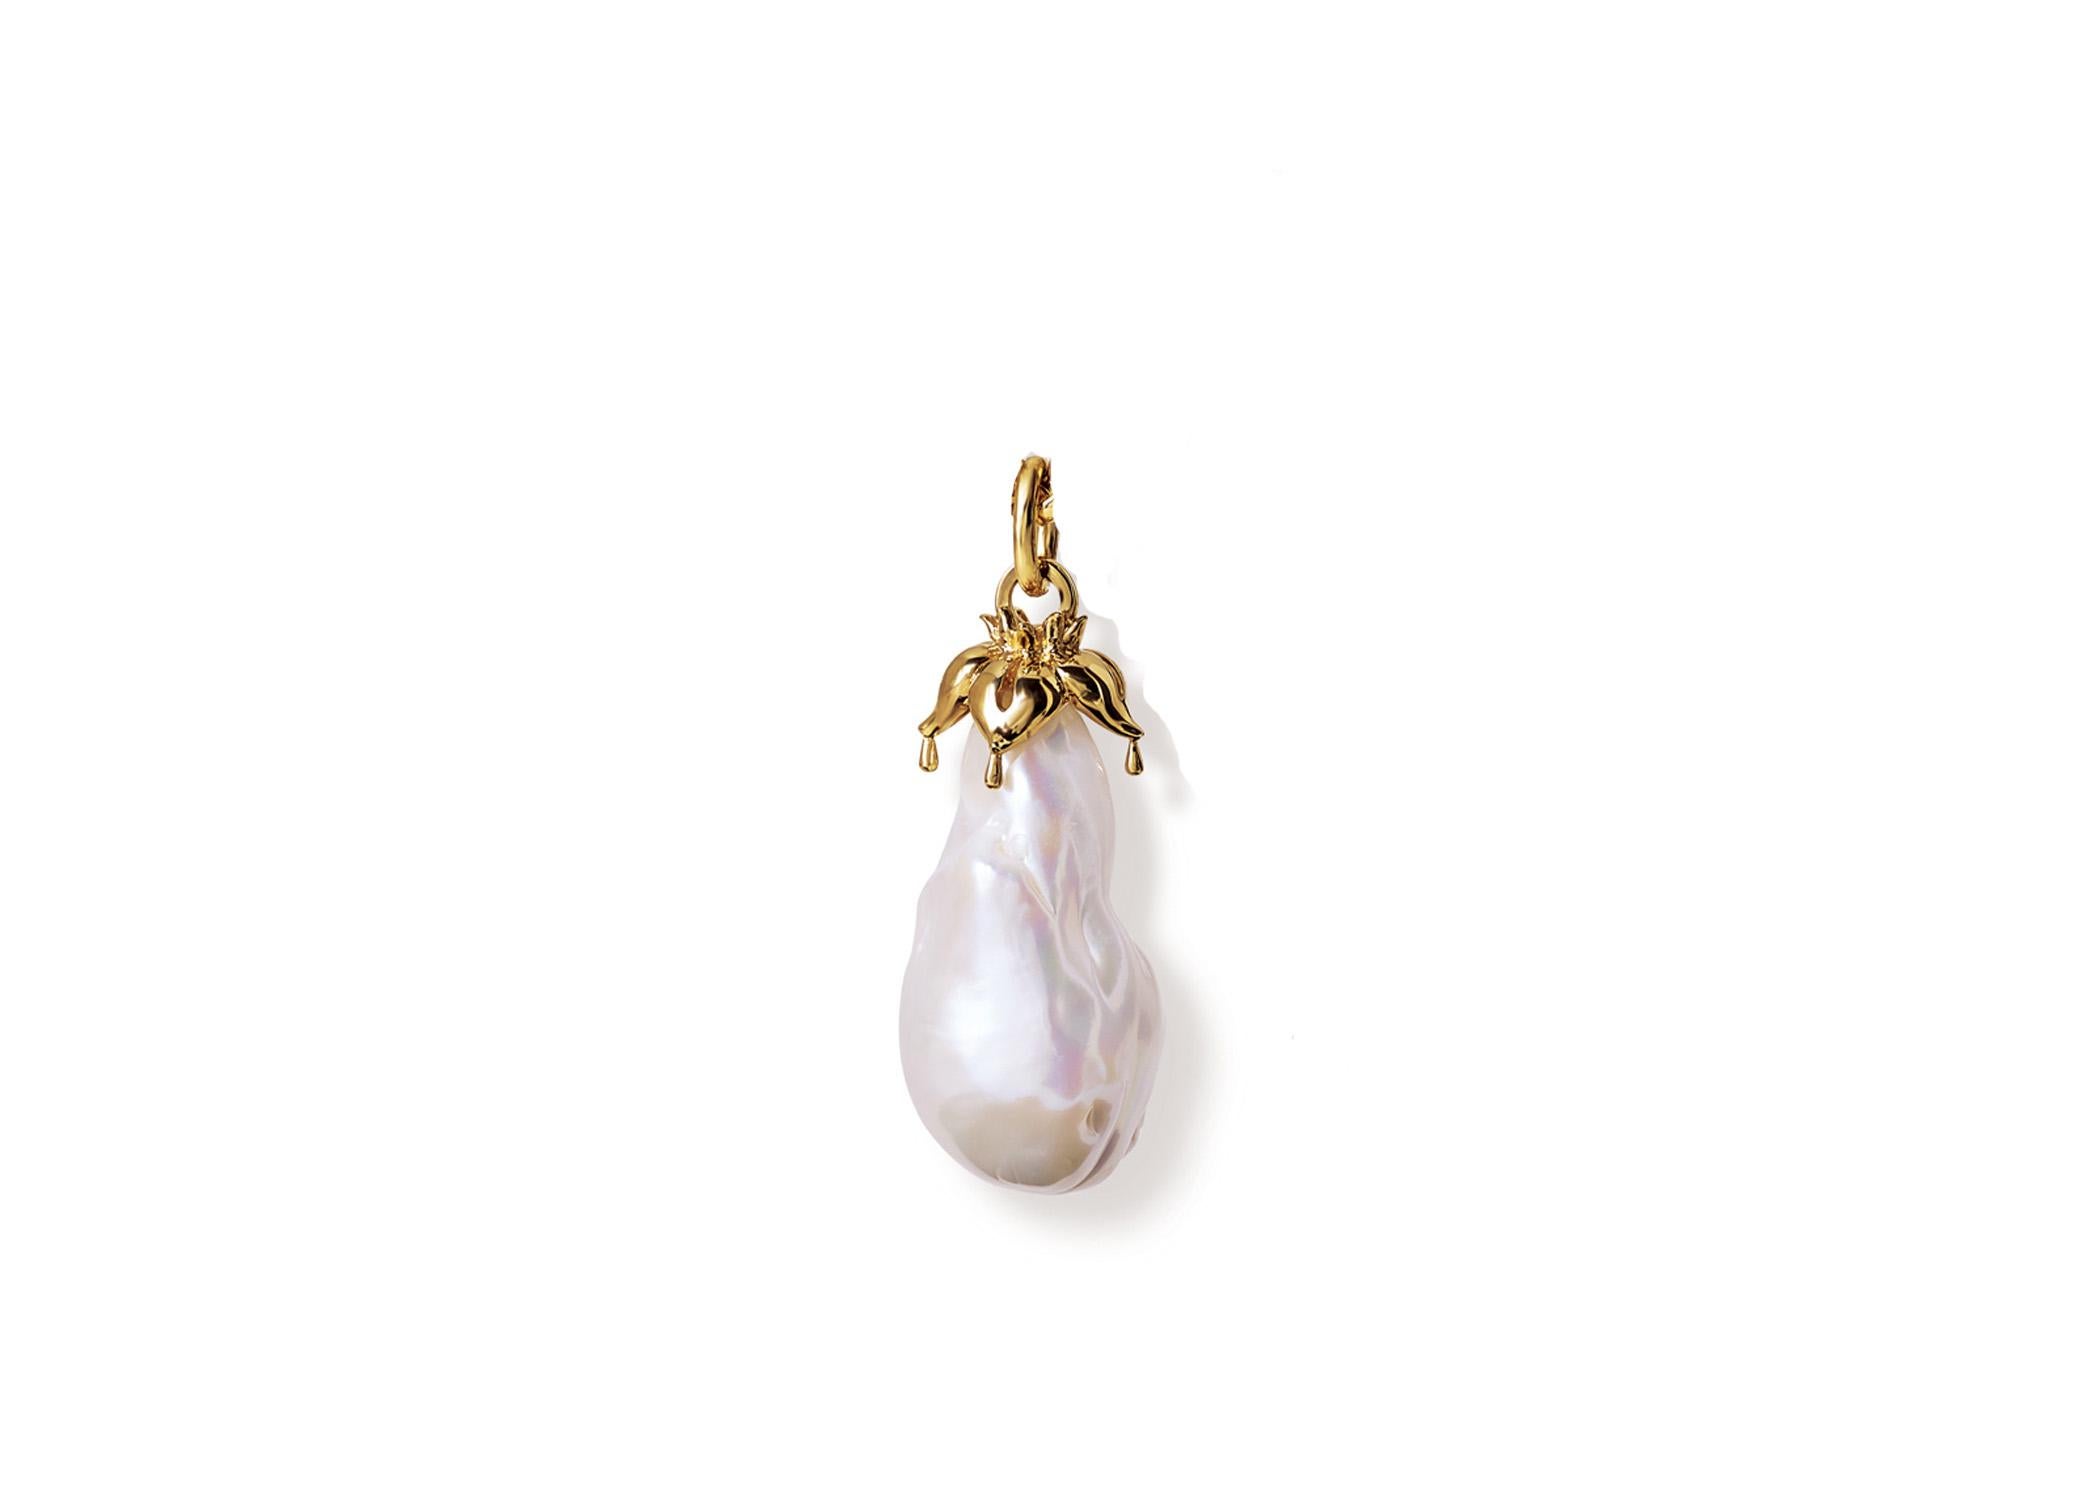 Iris necklace pendant in 9 karat yellow gold set with an exceptionally large baroque fresh water pearl. Inspired by the Japanese Iris flowers. From the Journey to Japan.

Pendant measures approximately 30mm

Chains sold separately. 